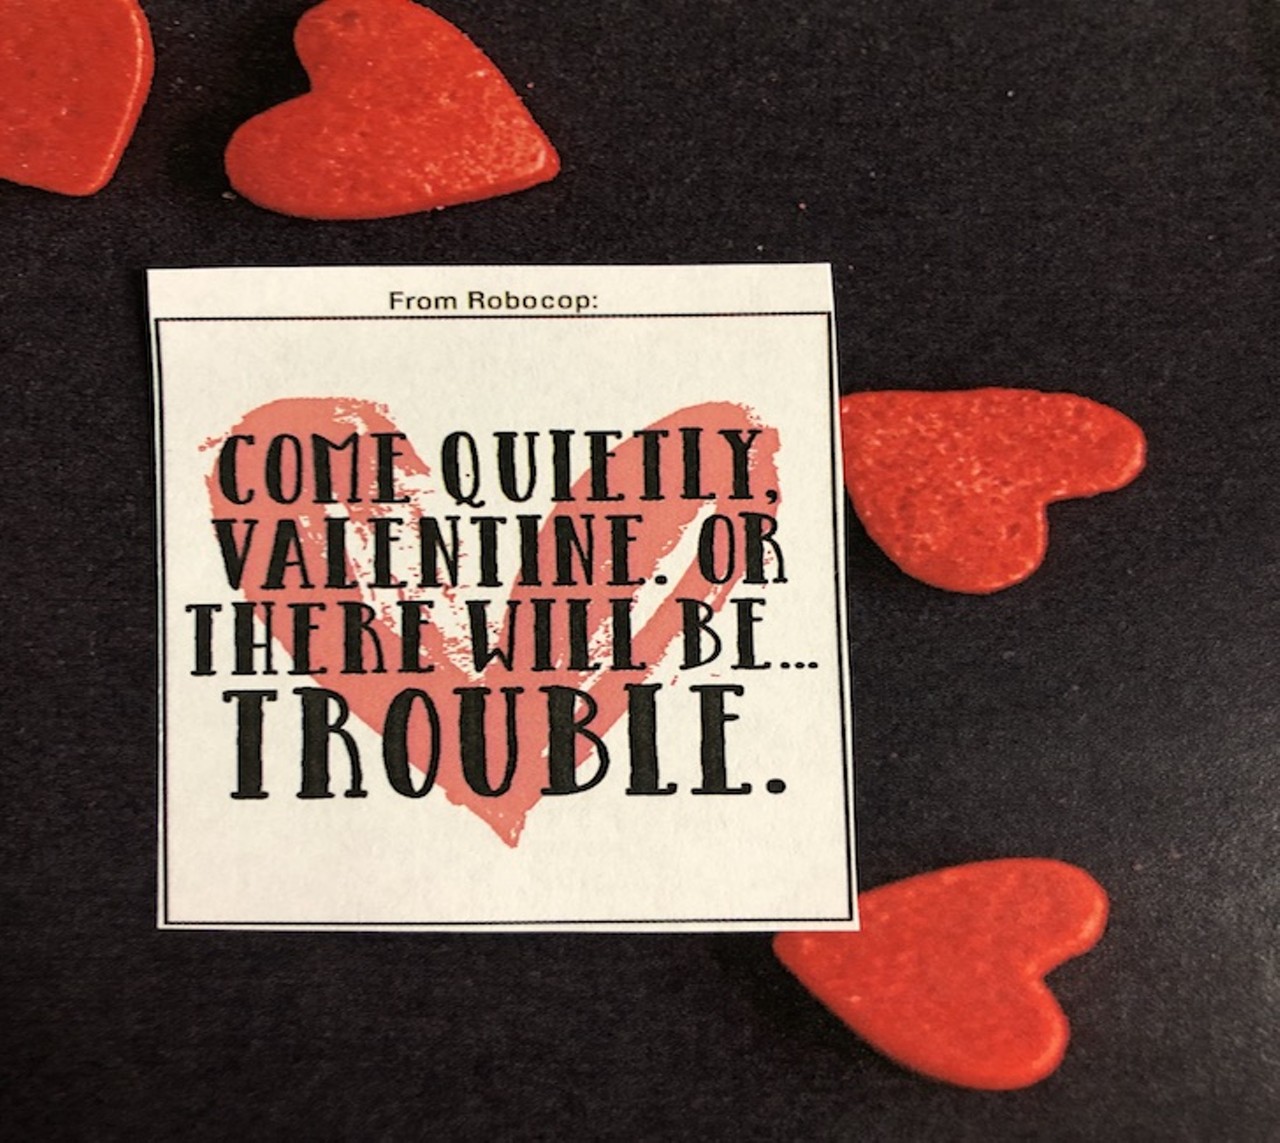 From Robocop:
Come quietly, Valentine. Or there will be...trouble.